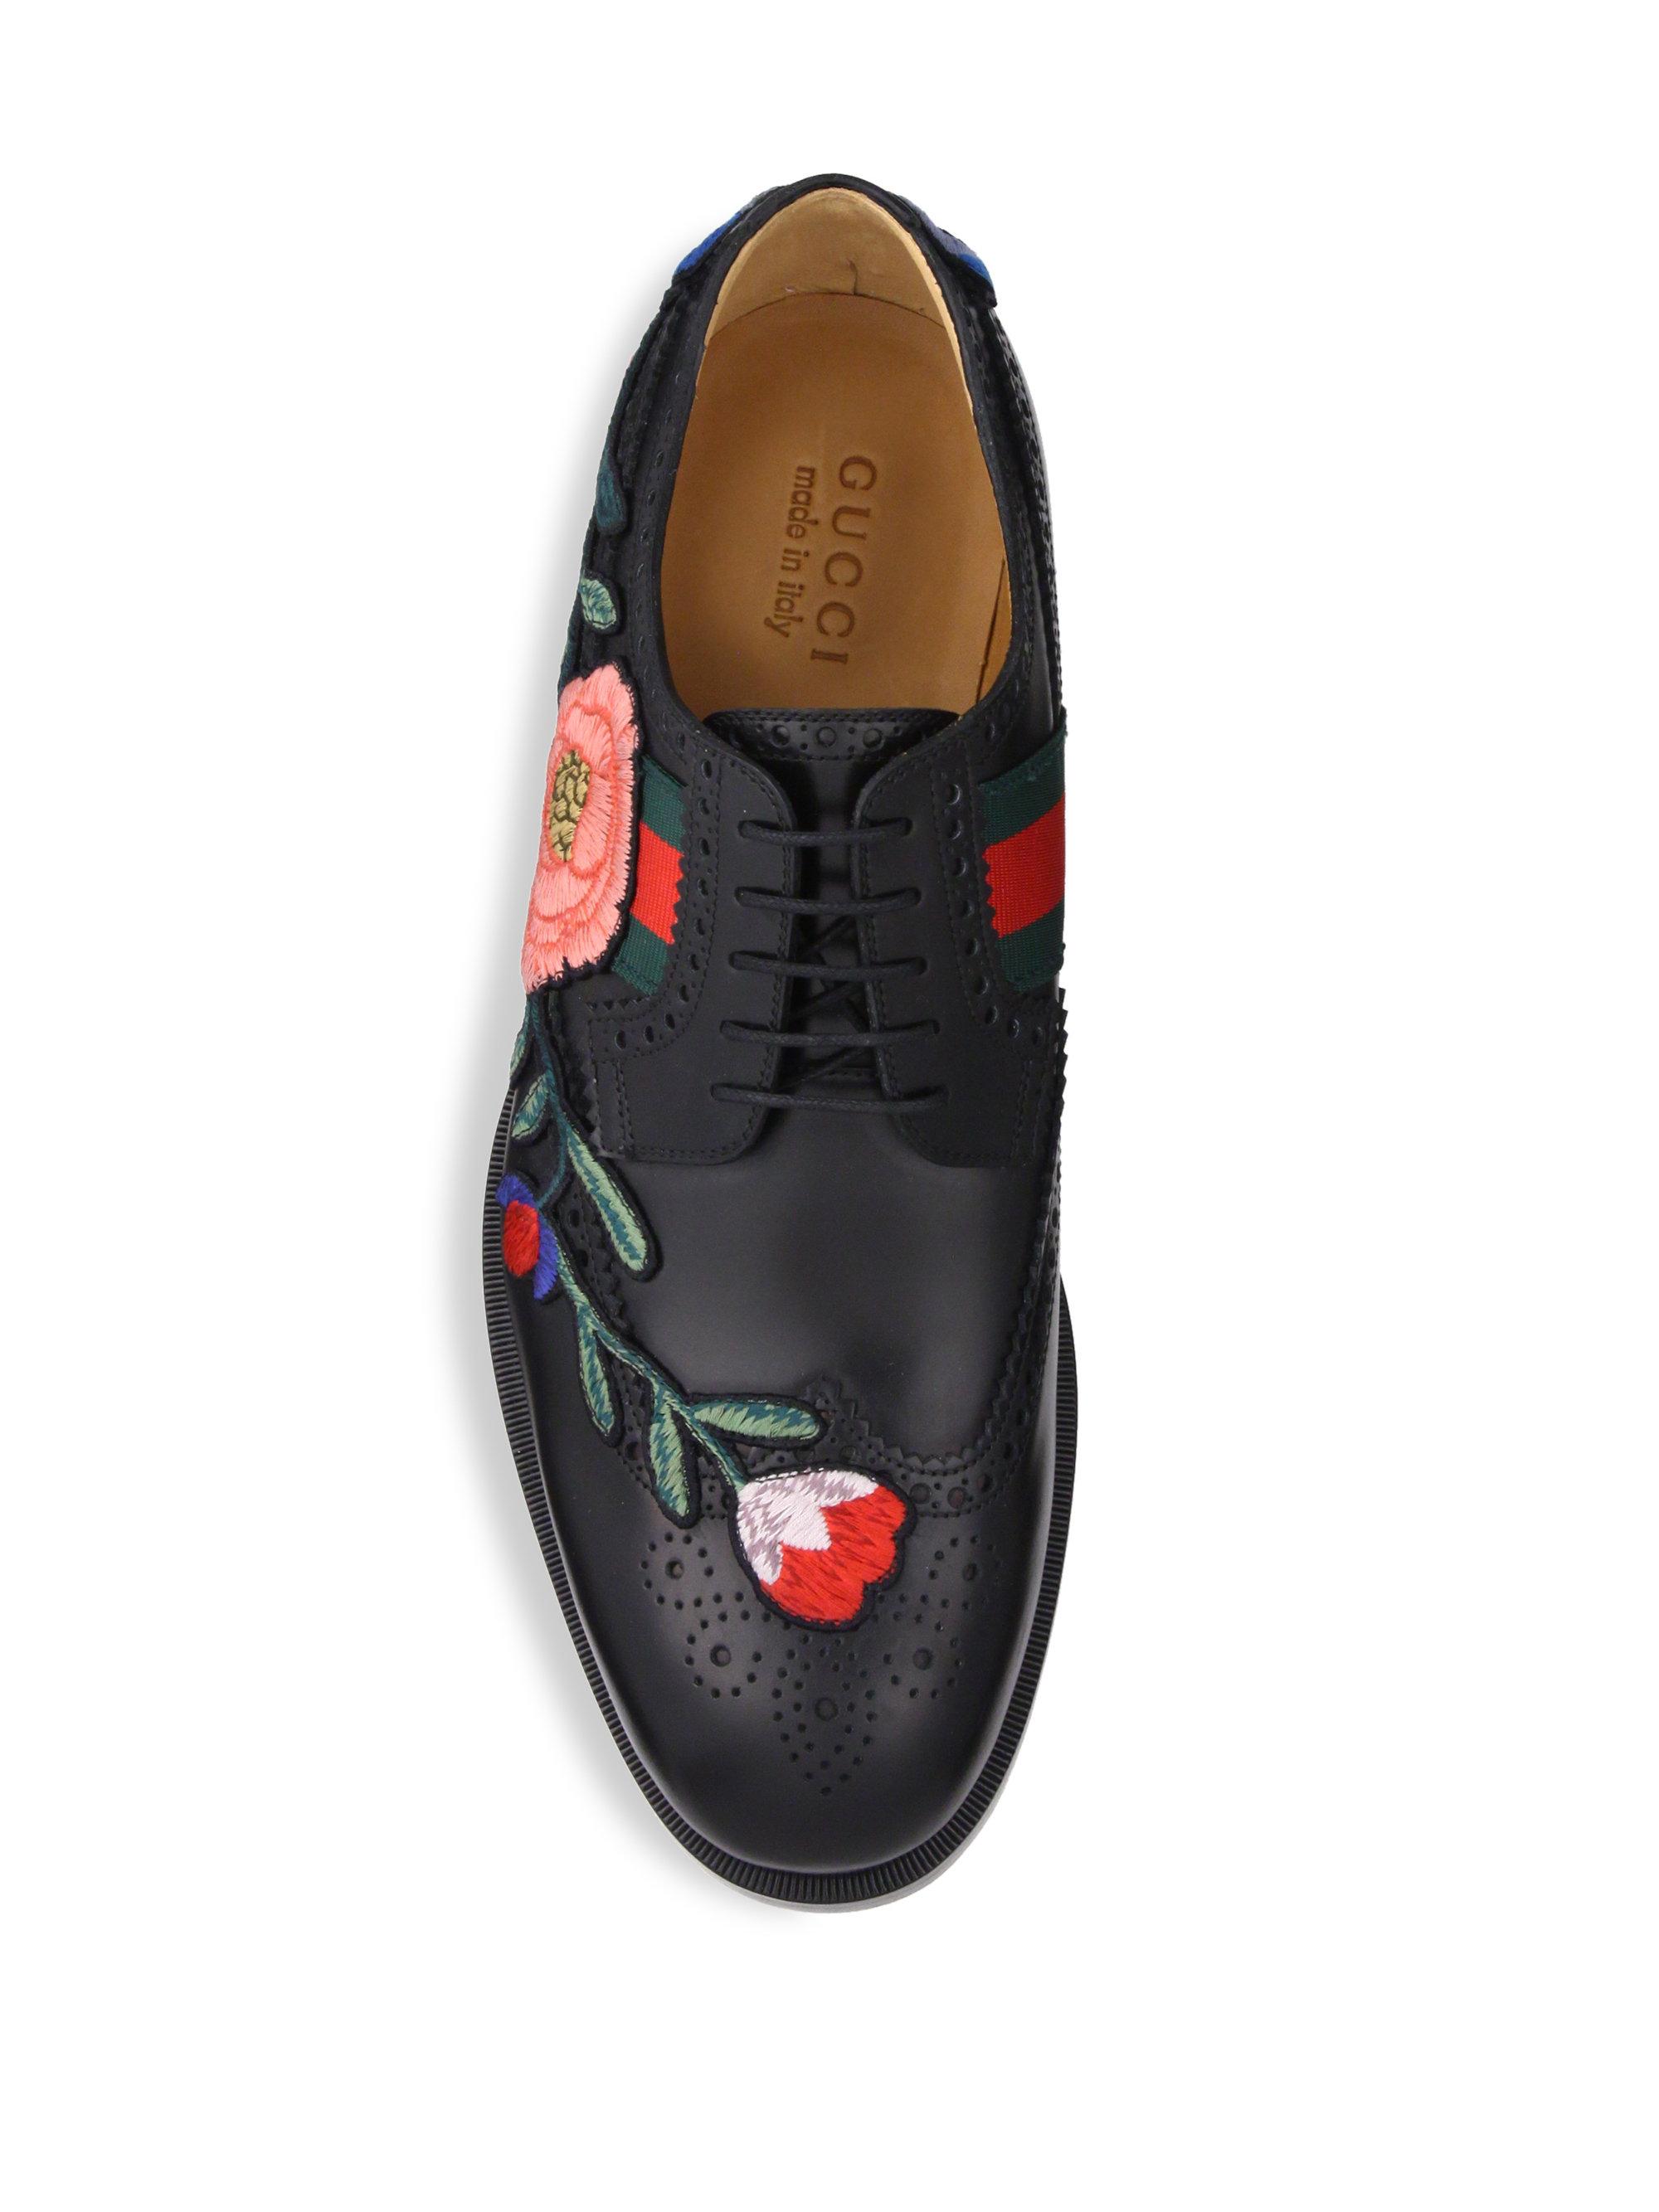 Gucci Embroidered Leather Brogue Shoes in Black for Men - Lyst